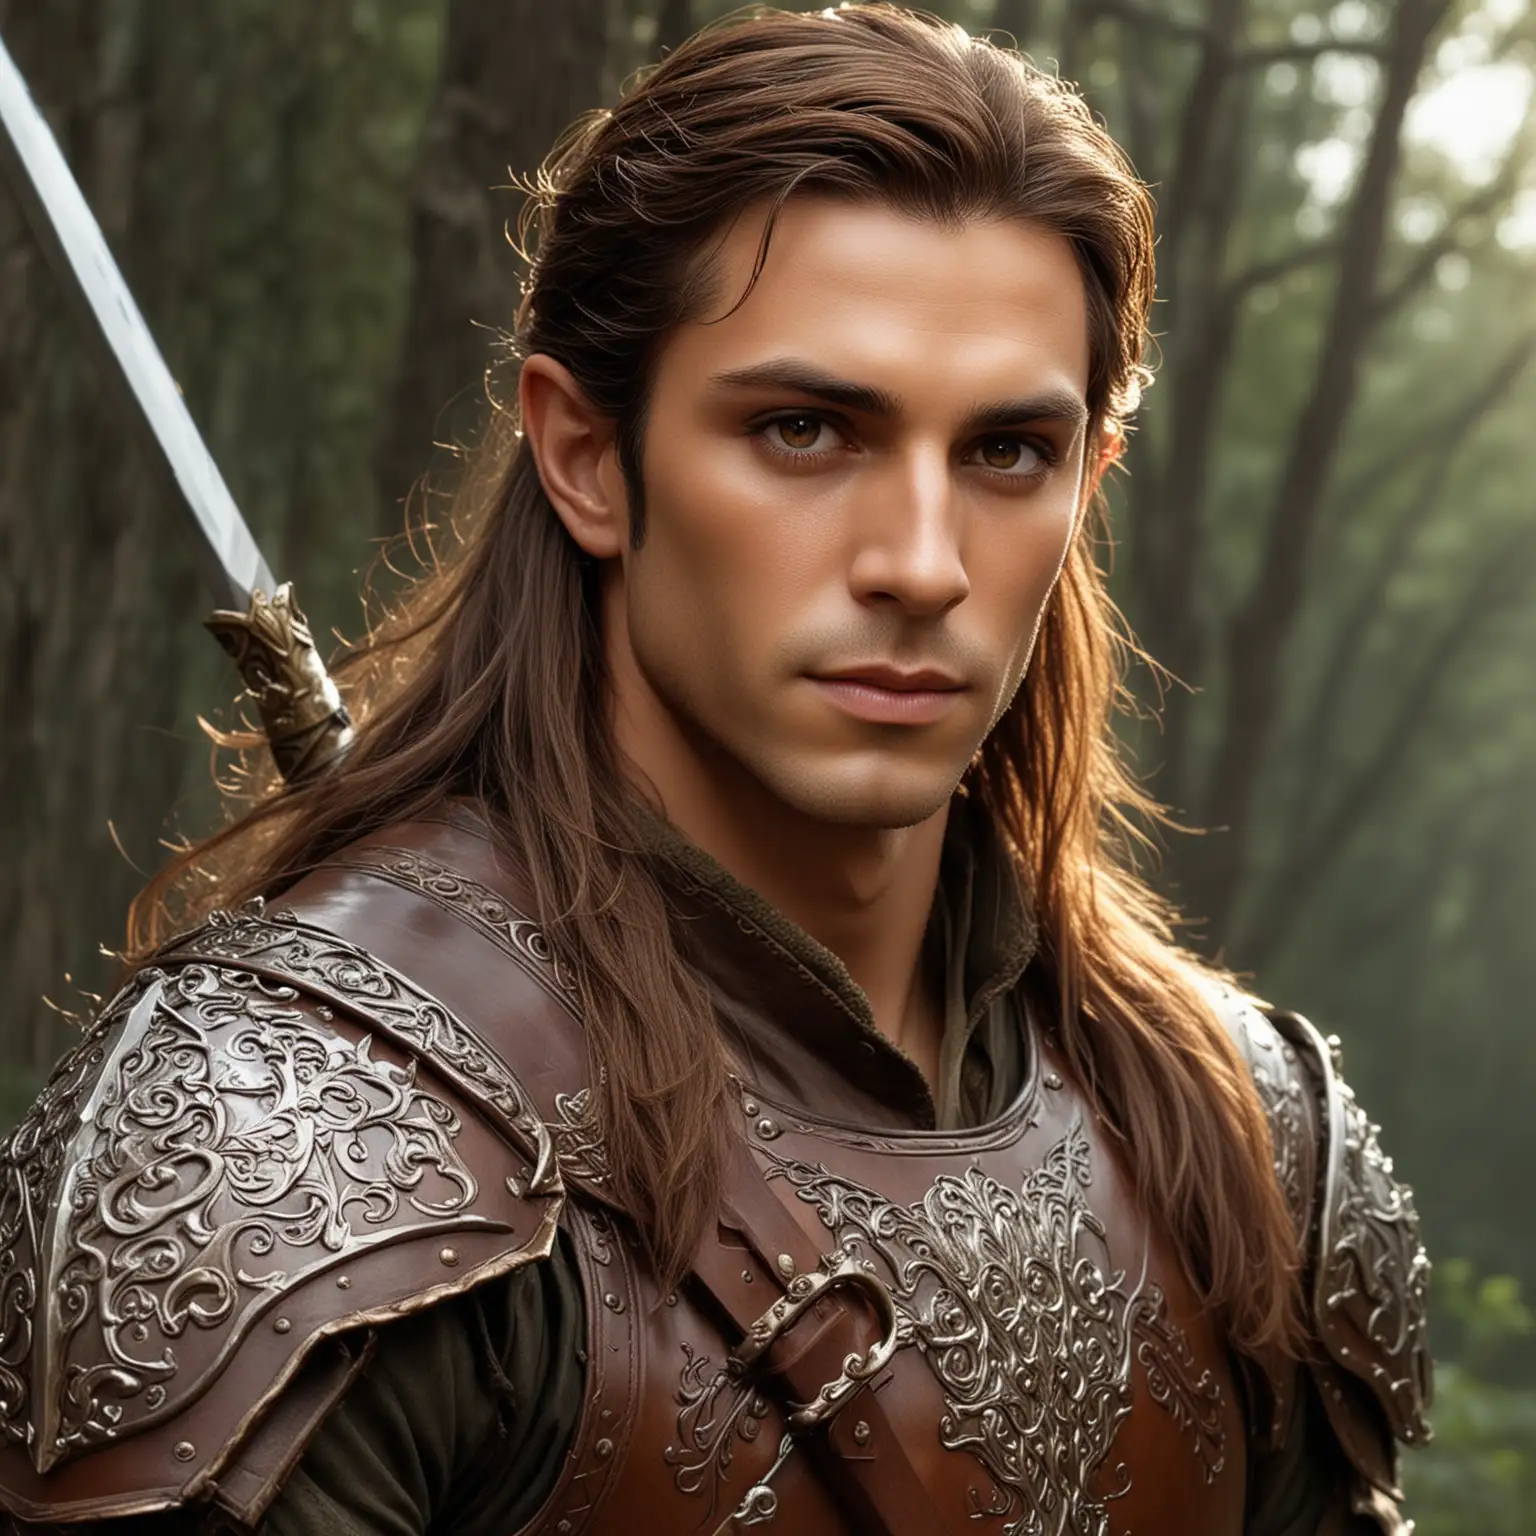 Handsome Wood Elf Prince in Brown Leather Armor